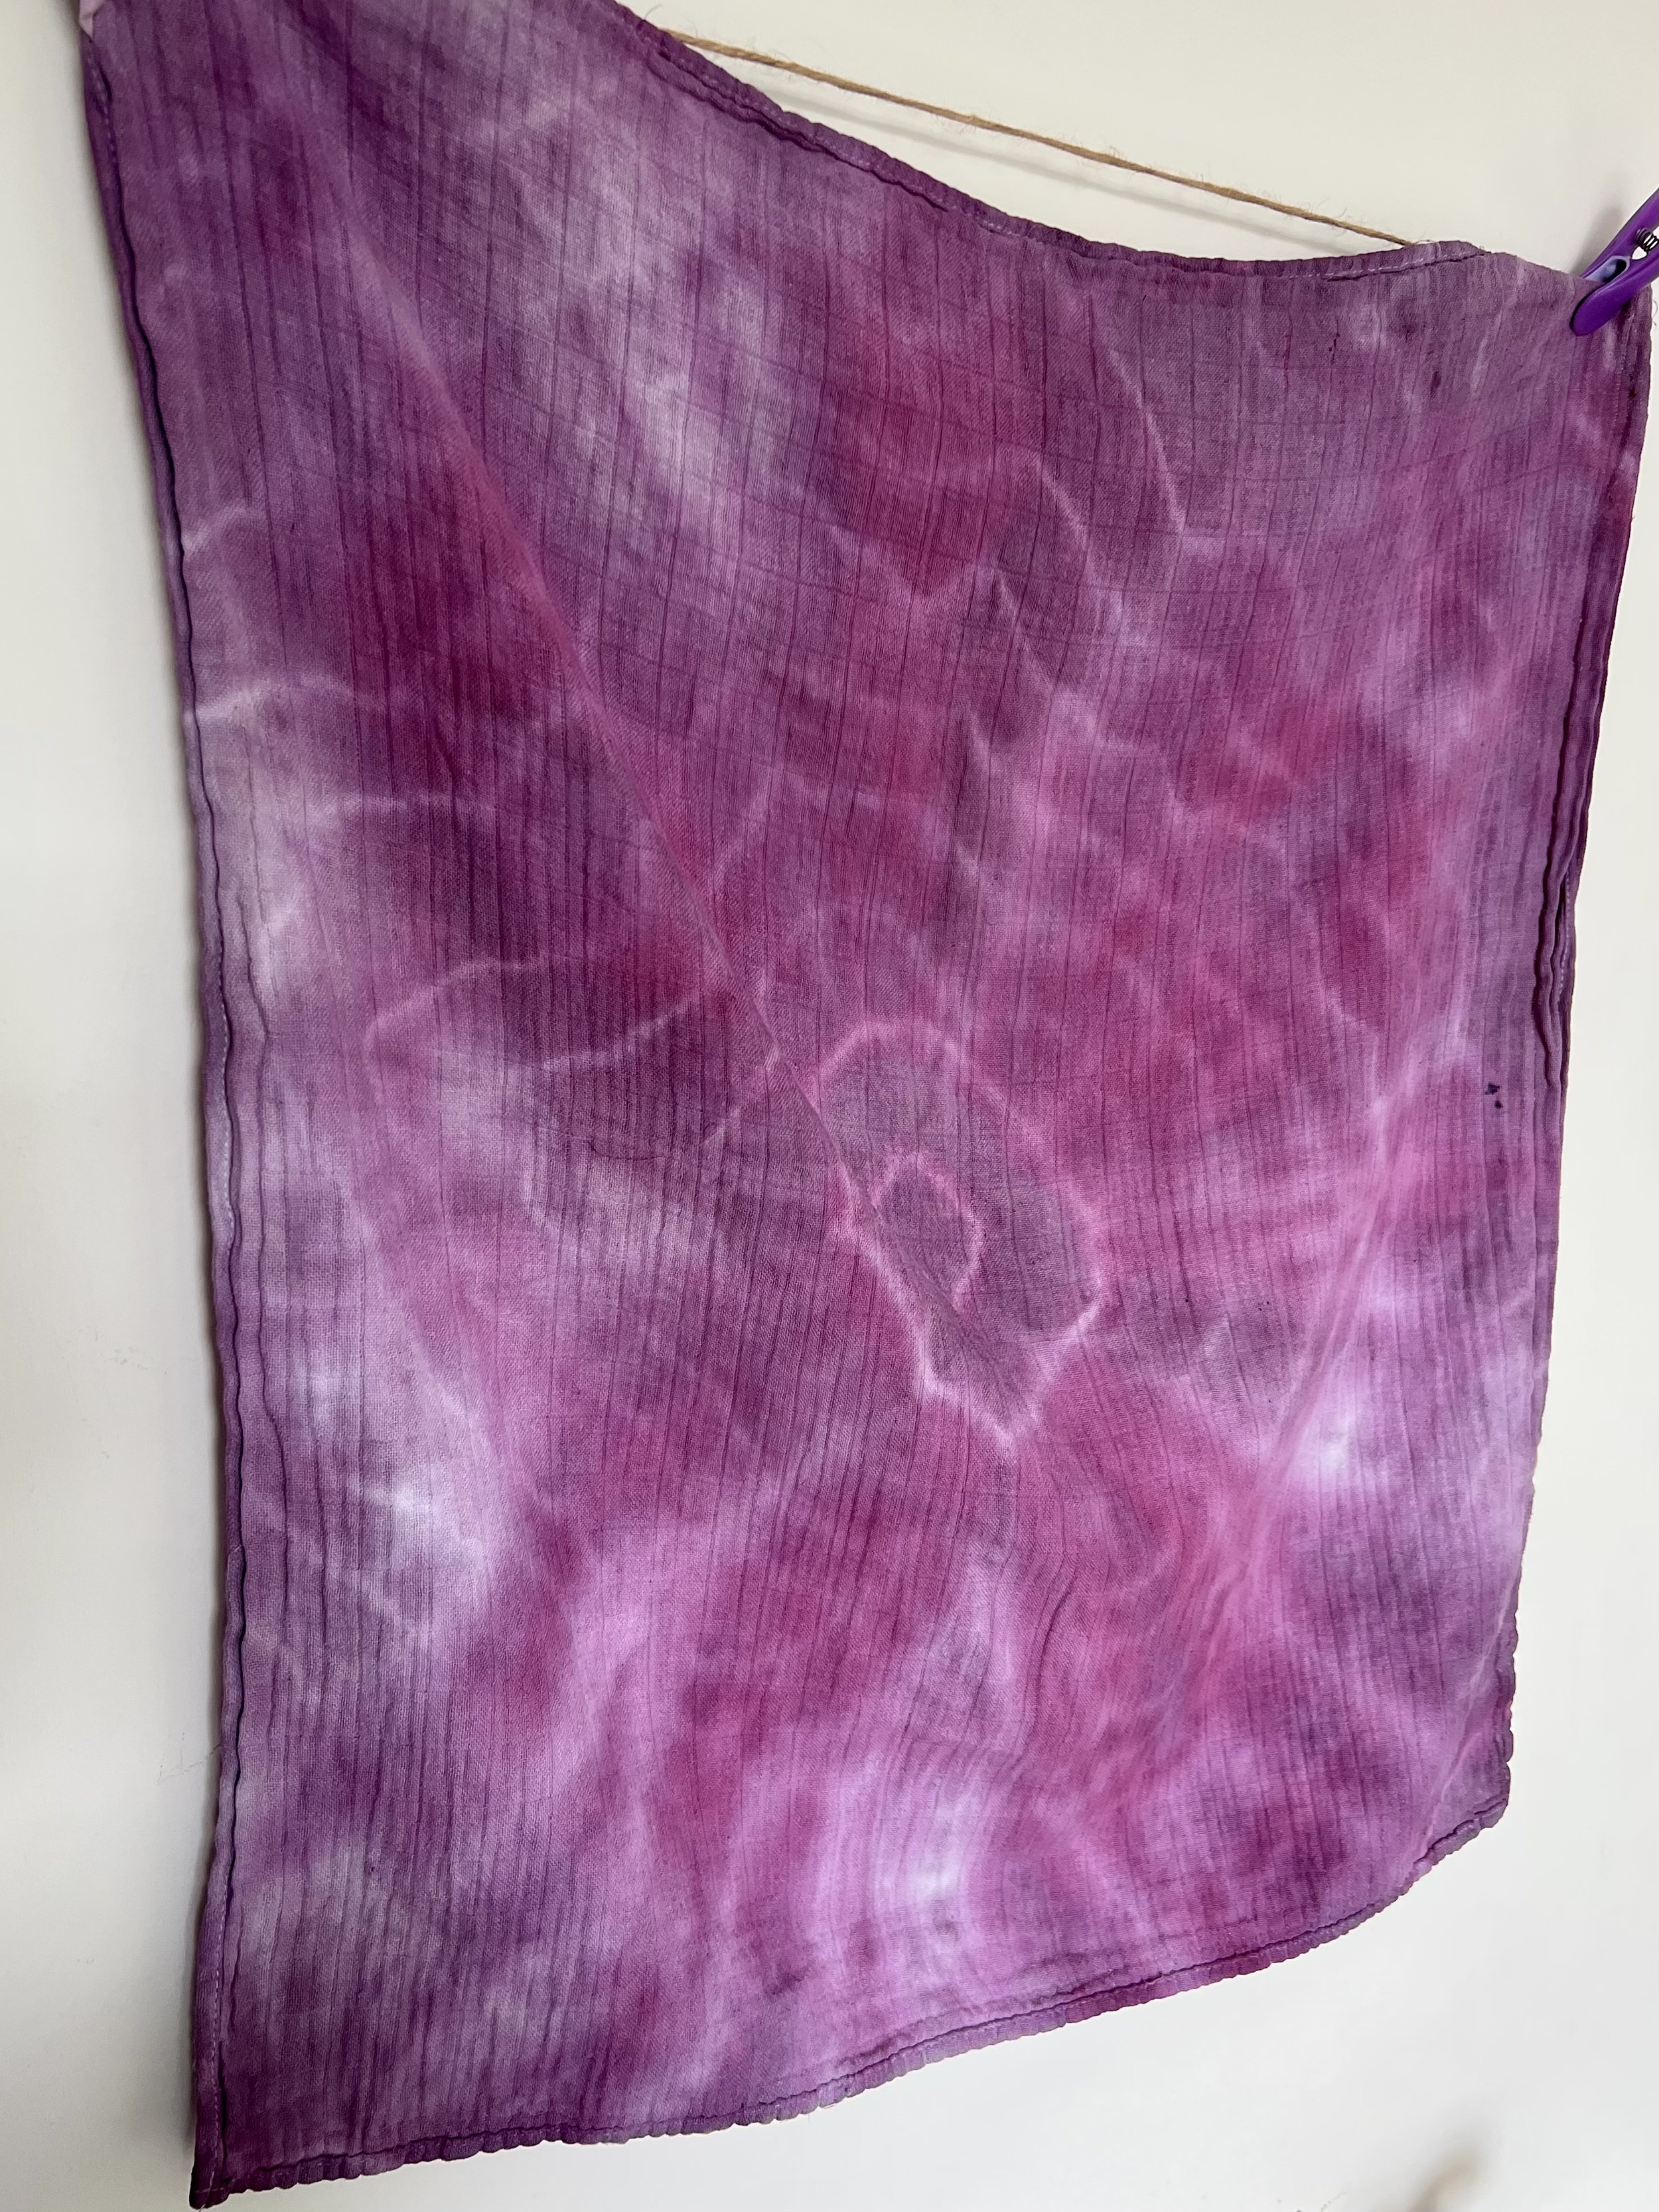 This was dyed with blackberries.